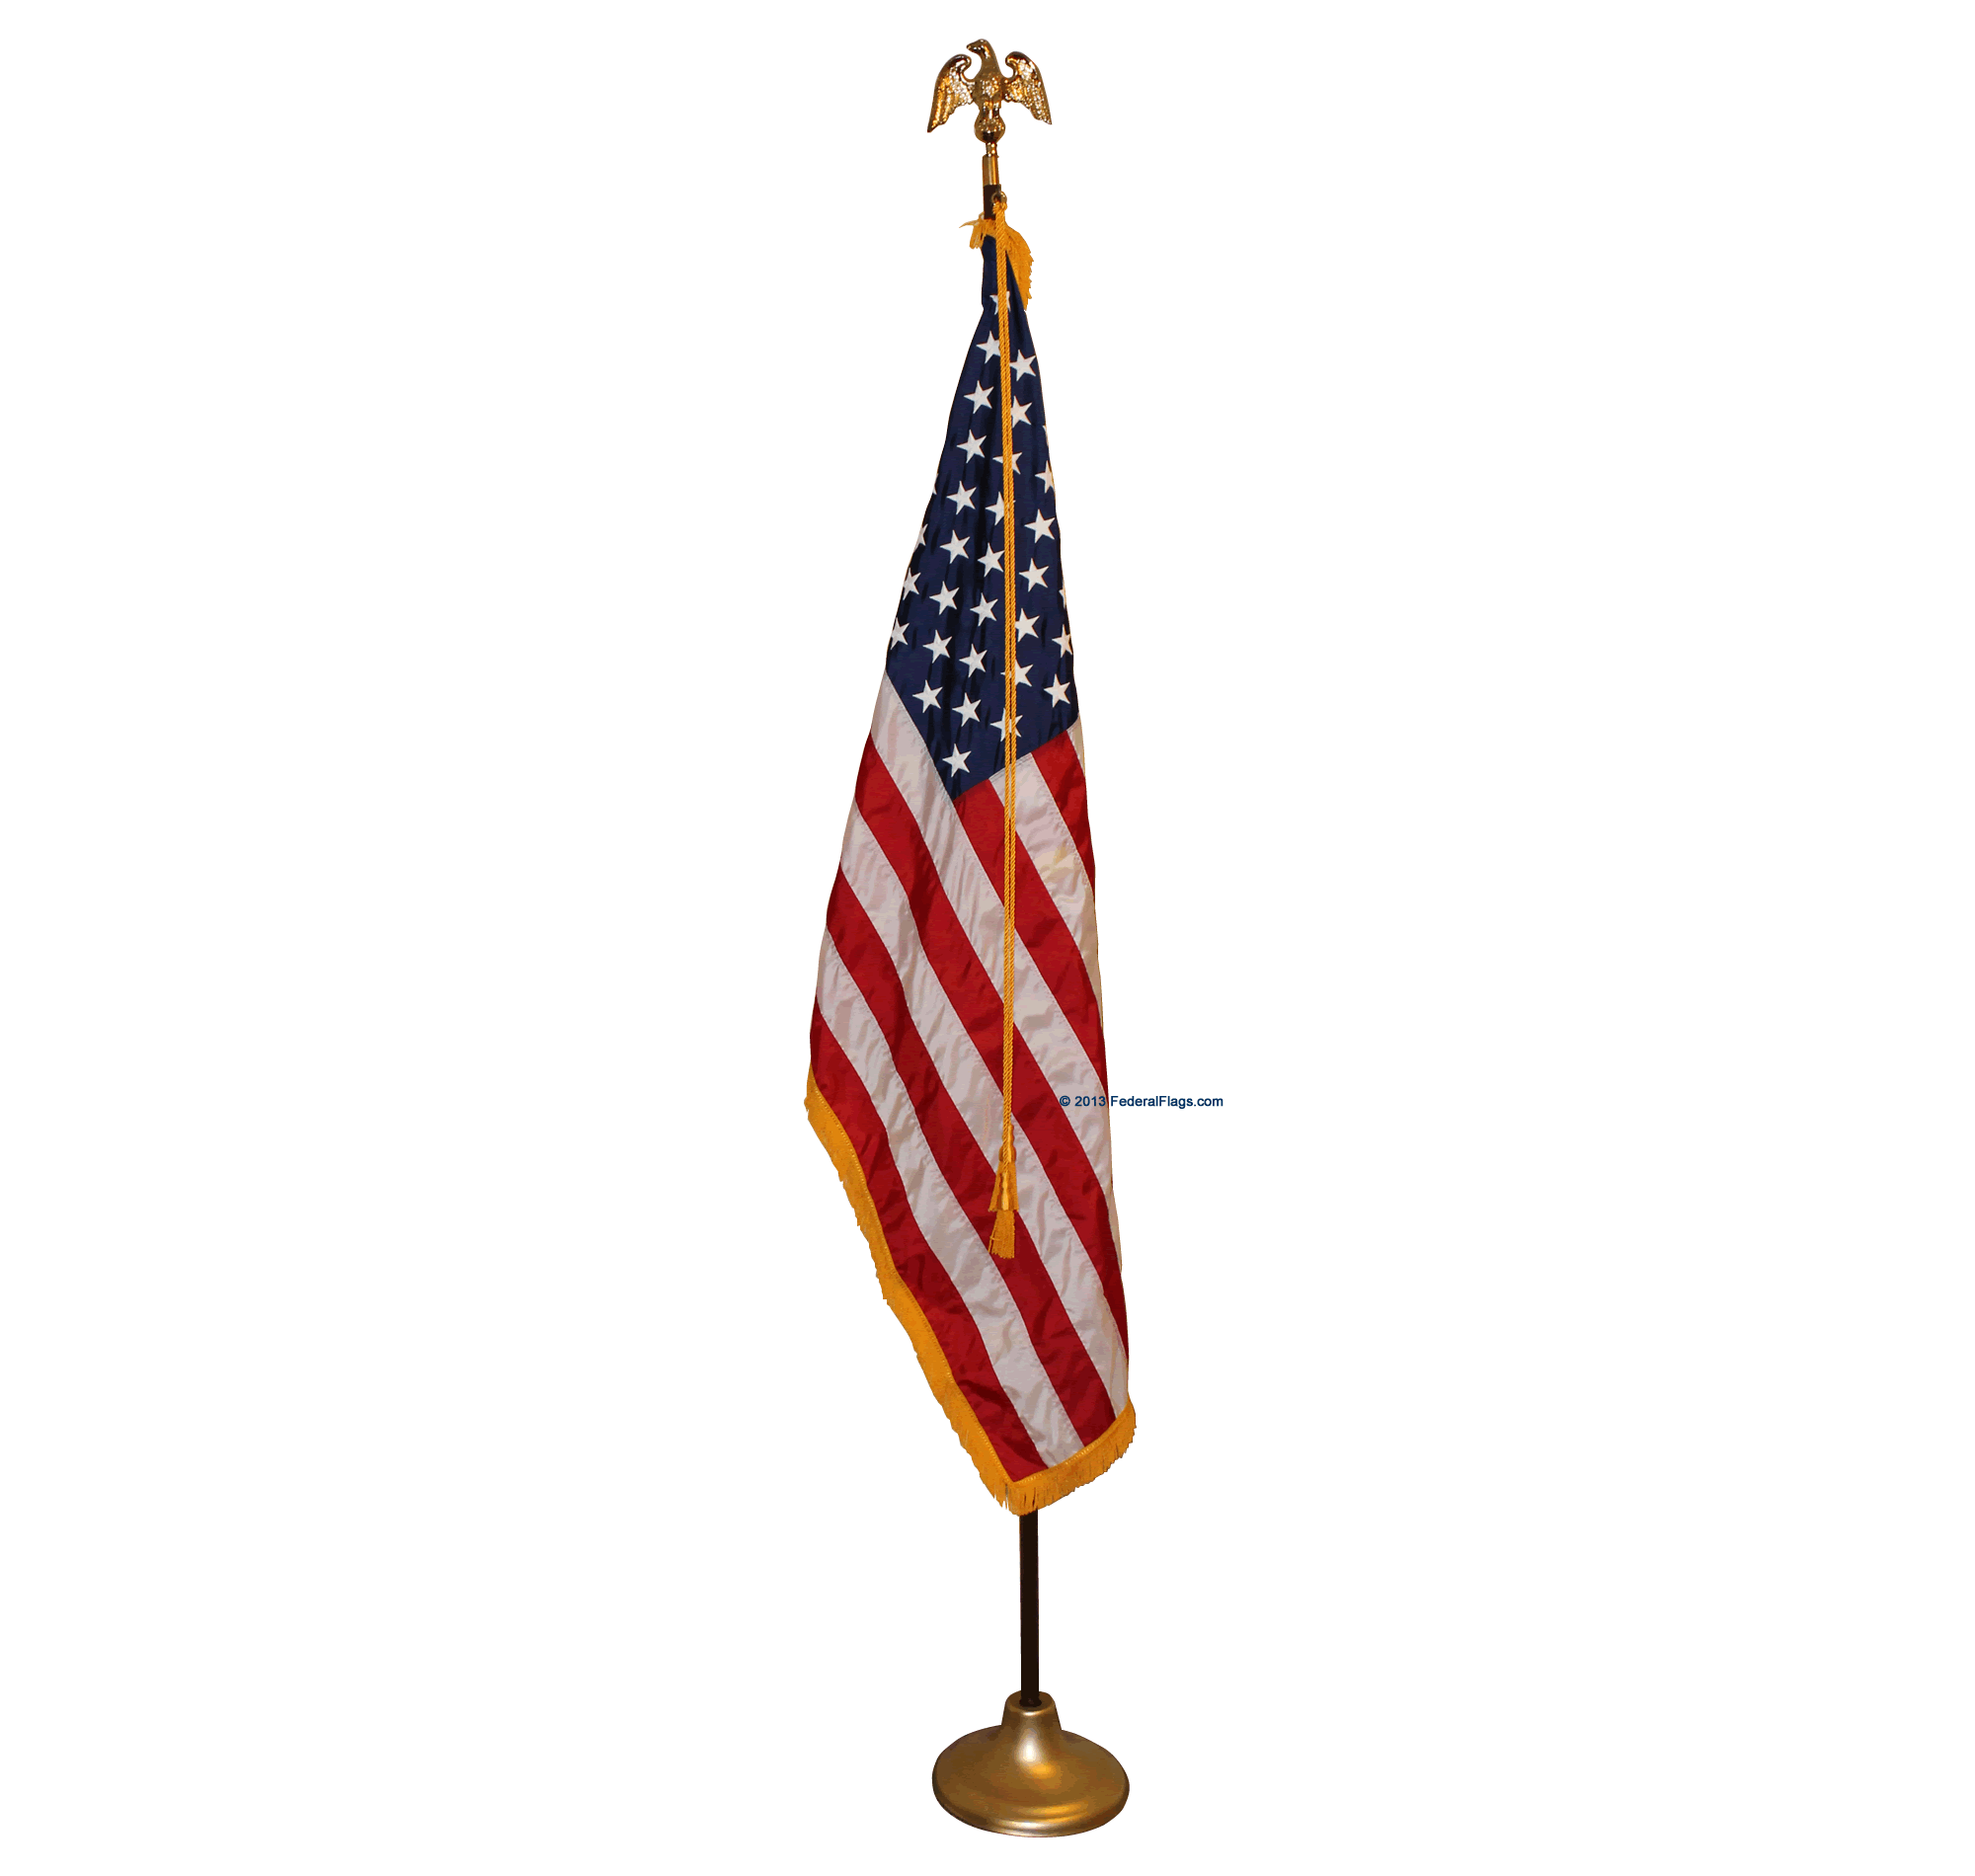 Insight Into Buying flagpoles And Their Importance